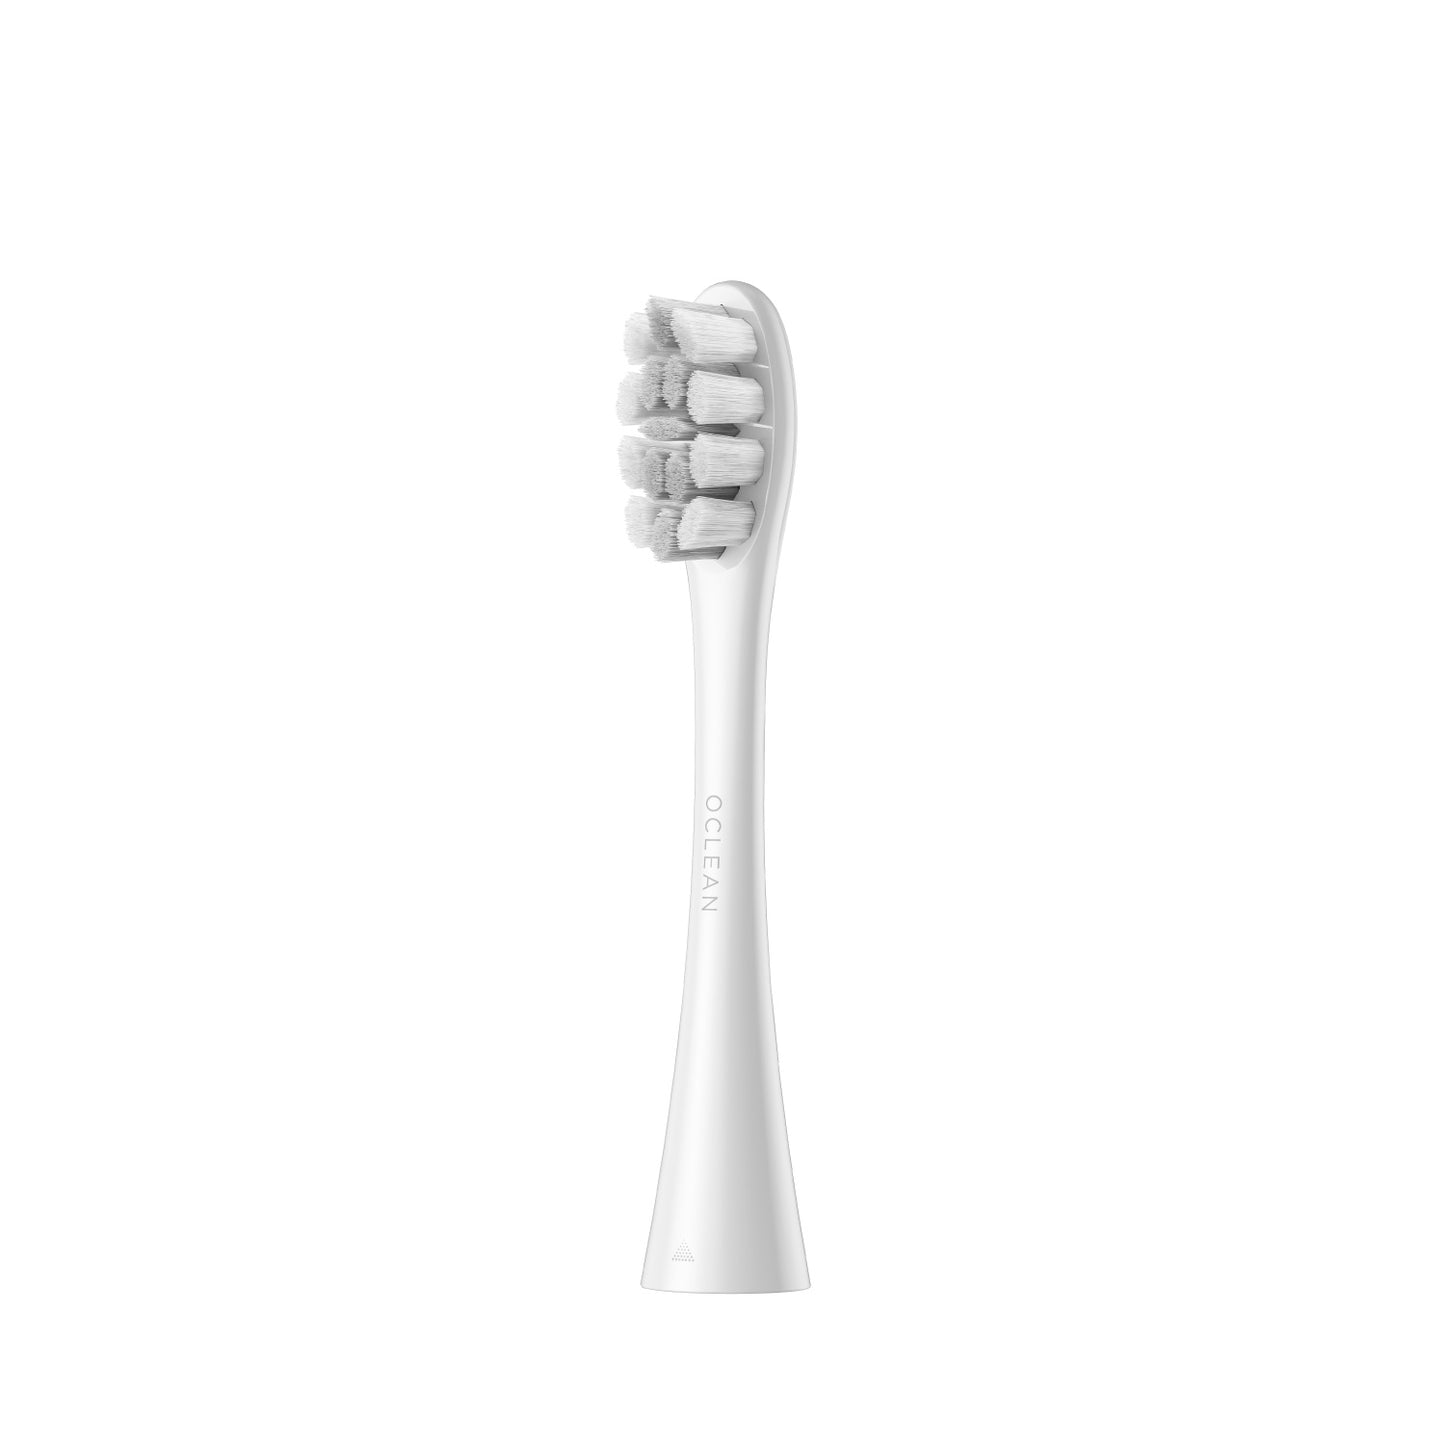 Oclean Brush Heads Refills Toothbrush Replacement Heads Plaque Control P1C10 Oclean Official